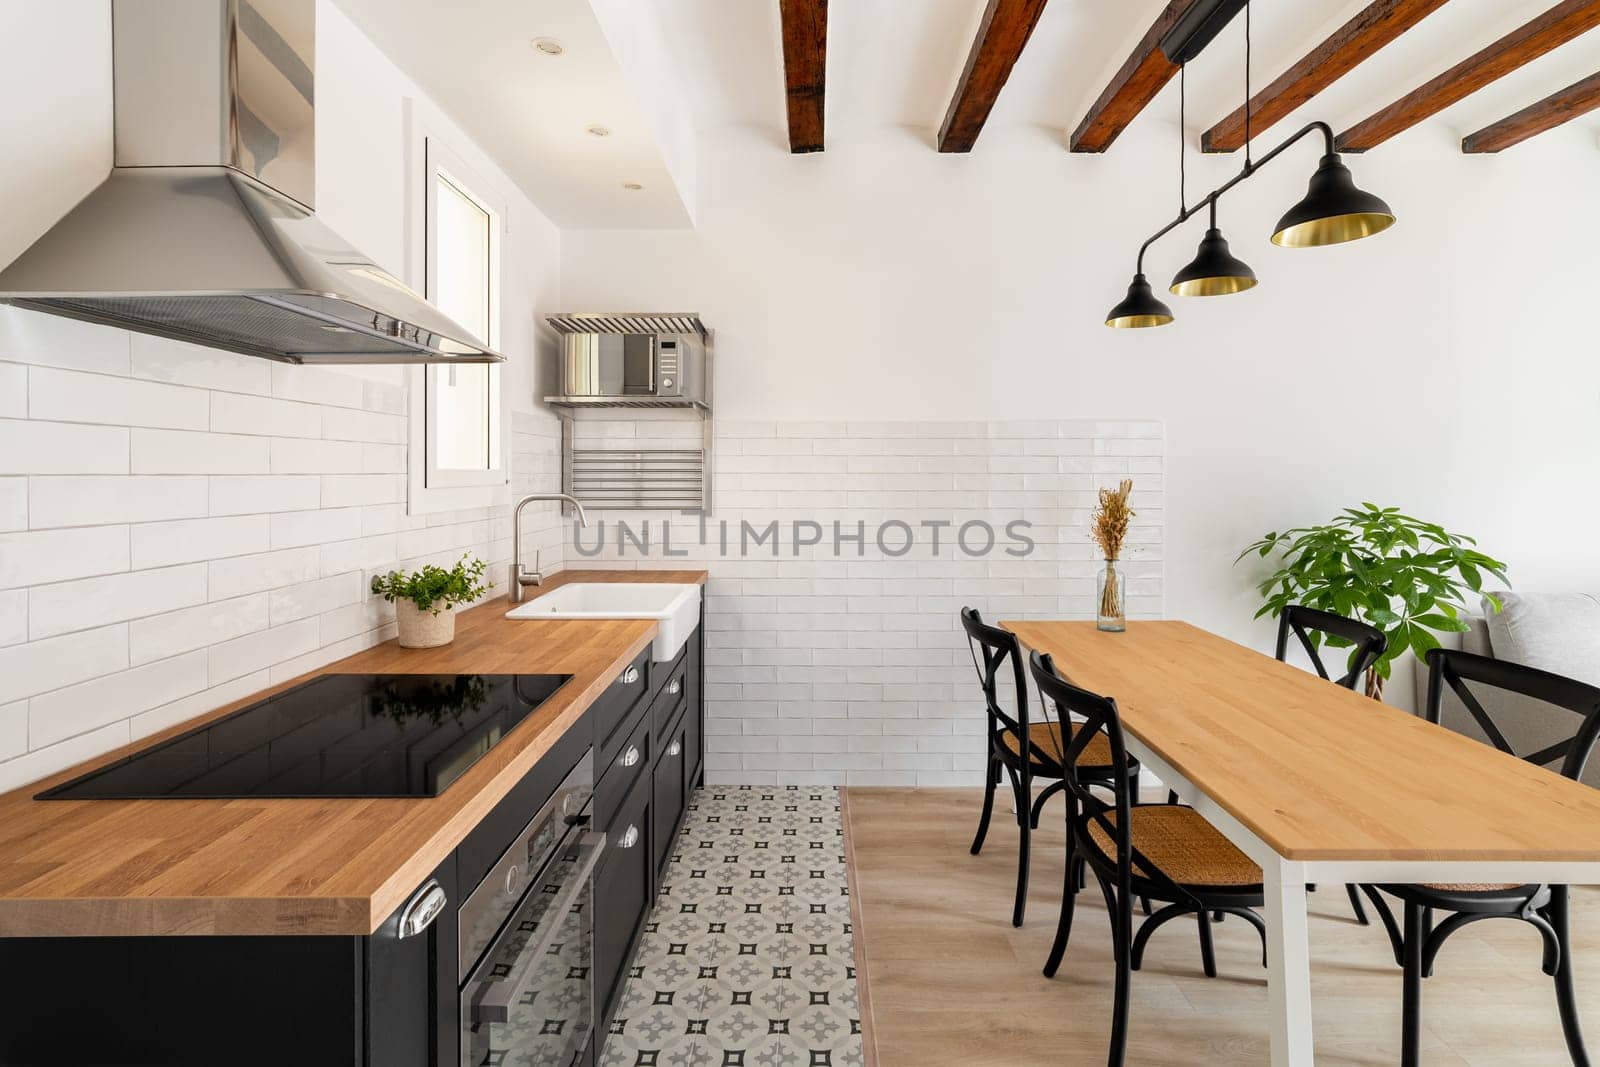 Long dining table with four chairs next to a kitchen island with a build in stove and extractor hood with white walls and renovation beams in a newly built house. Copyspace by apavlin